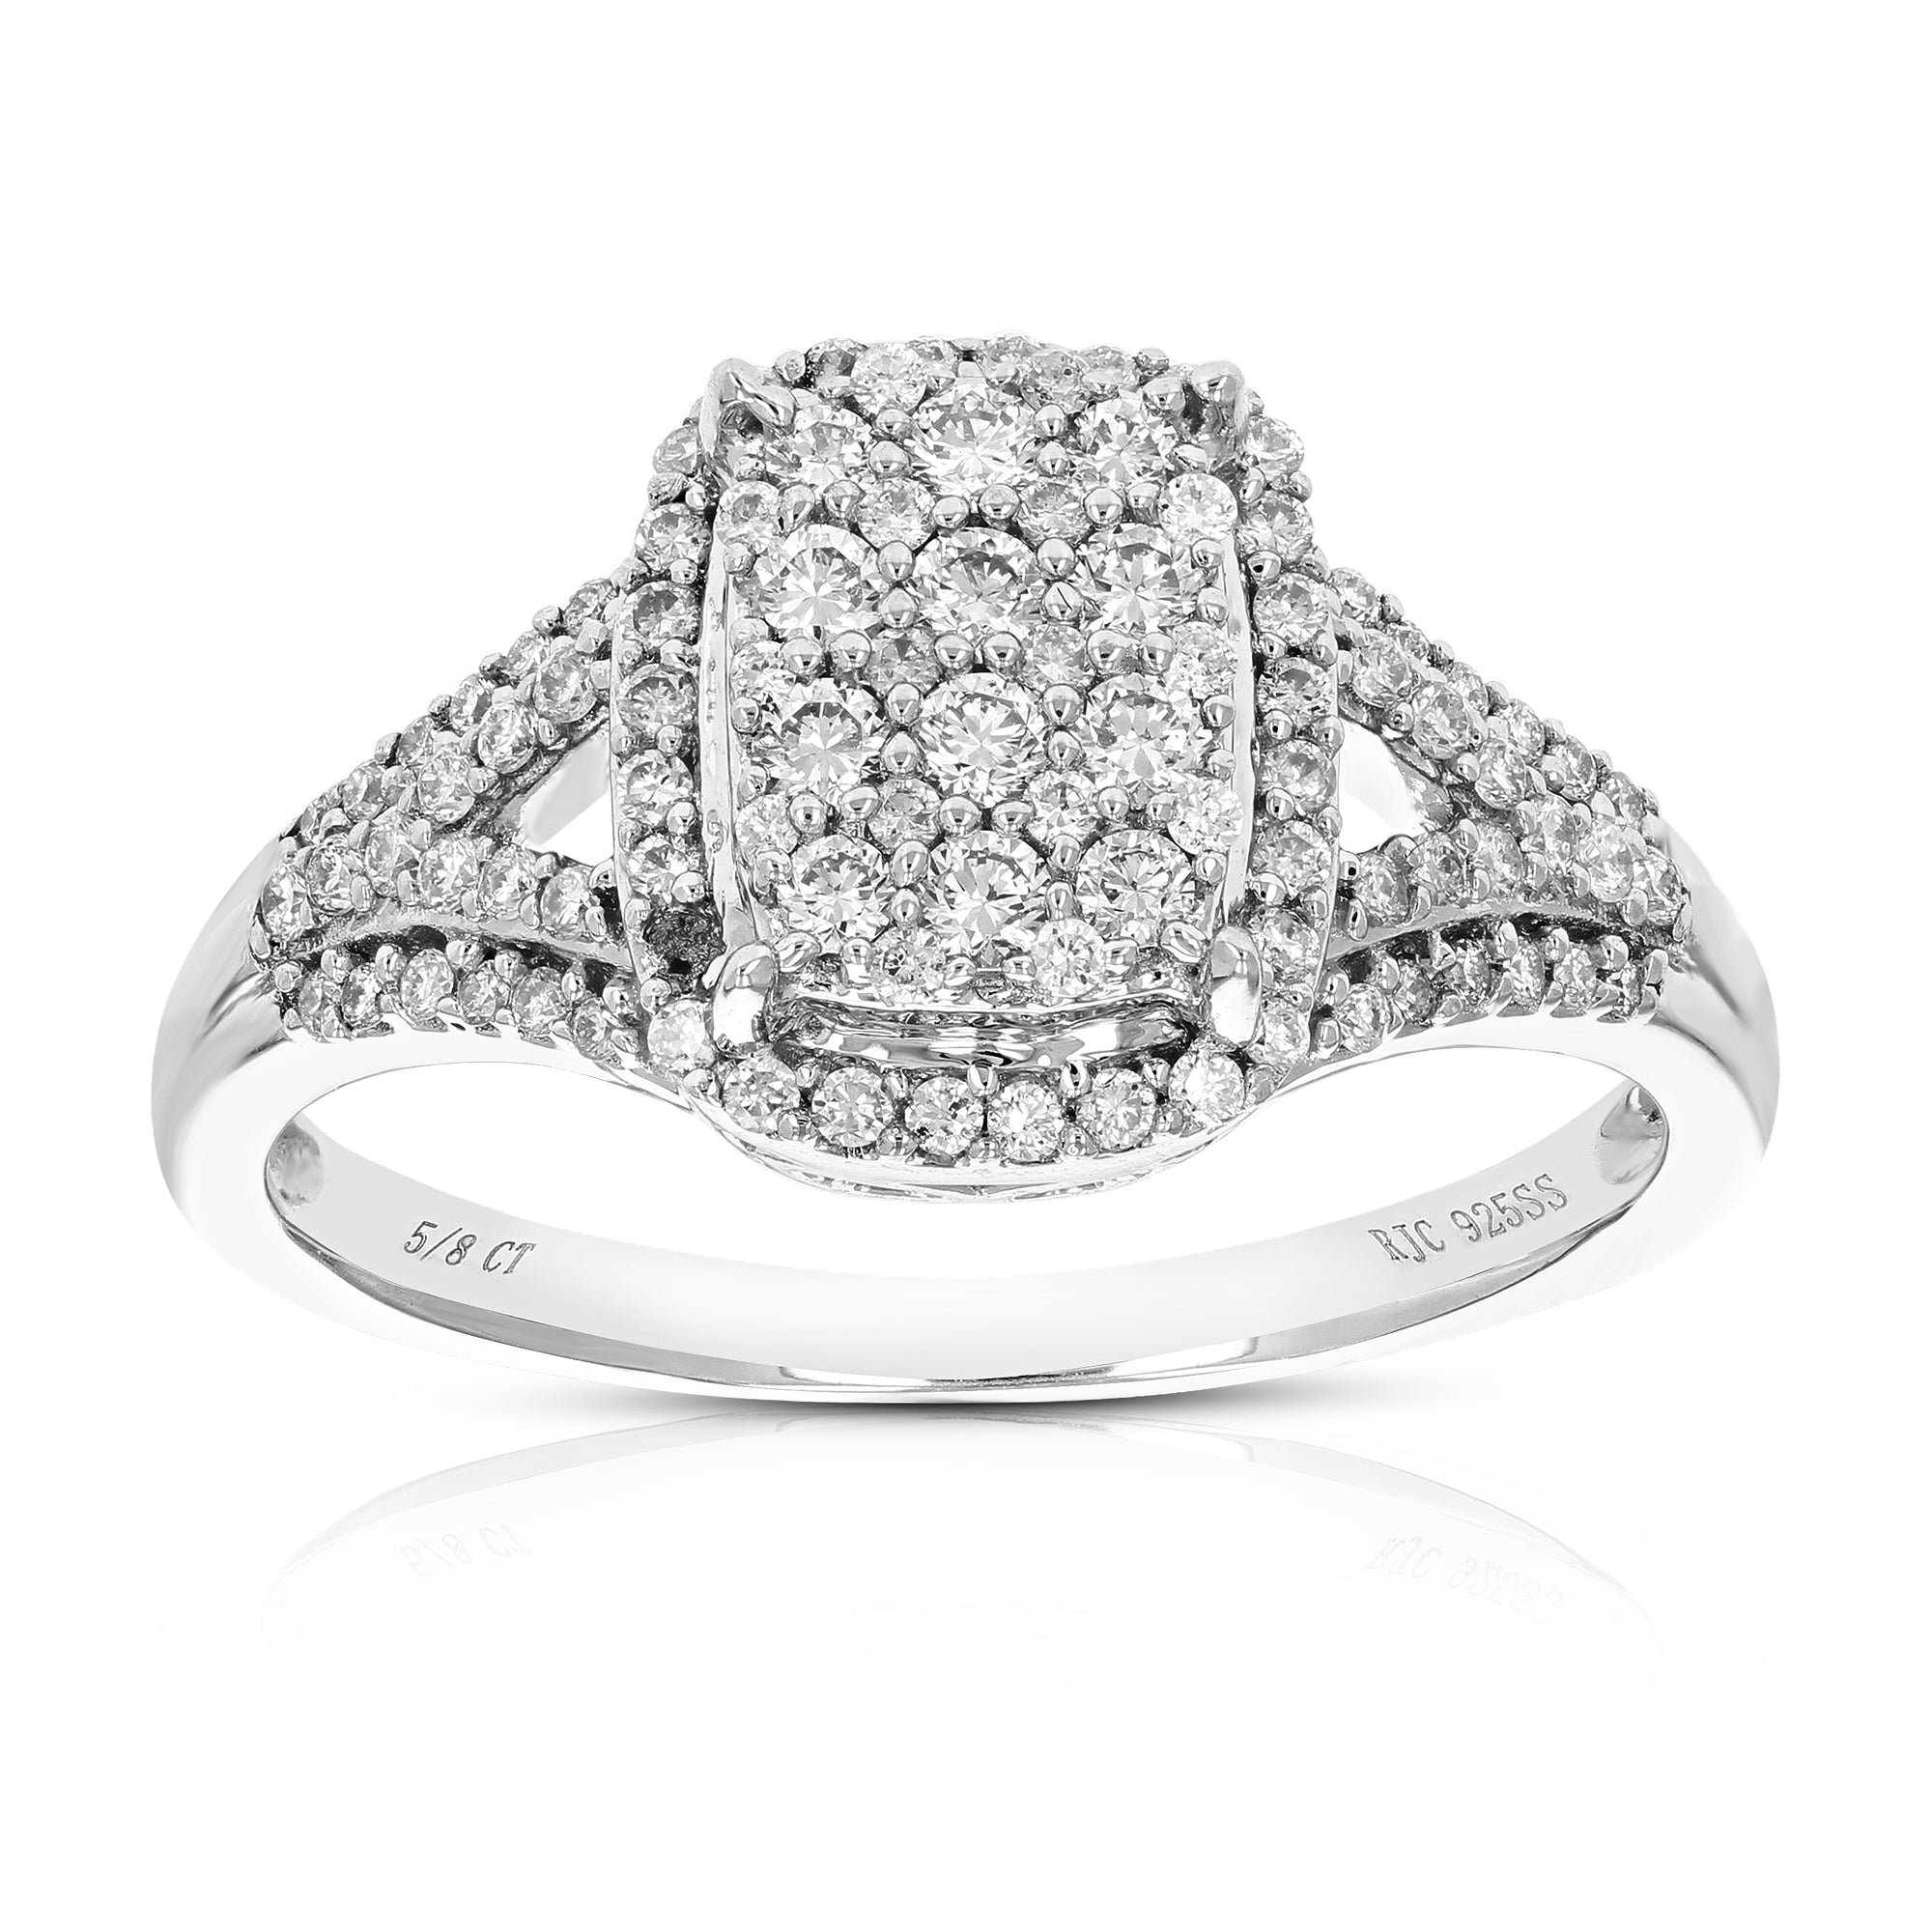 0.63 cttw Diamond Engagement Ring for Women, Round Lab Grown Diamond Ring in 0.925 Sterling Silver, Prong Setting, Size 6-8